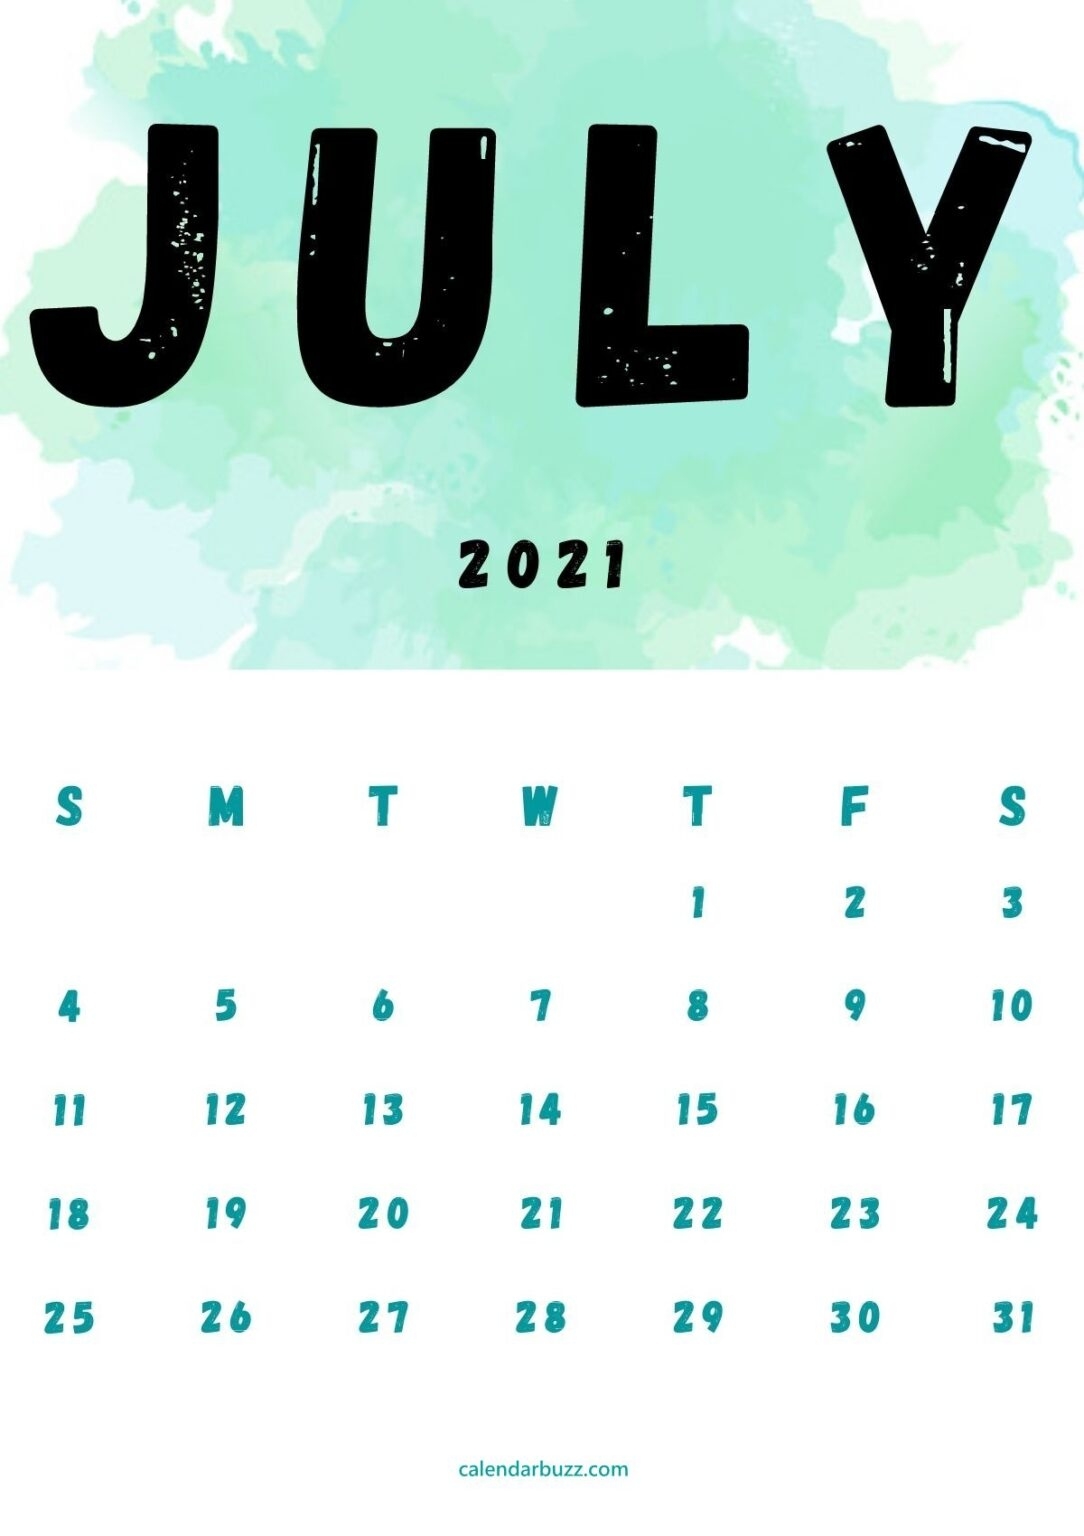 July 2021 Watercolor Calendar Printable Free Download | Calendarbuzz Fourth Of July 2021 Calendar